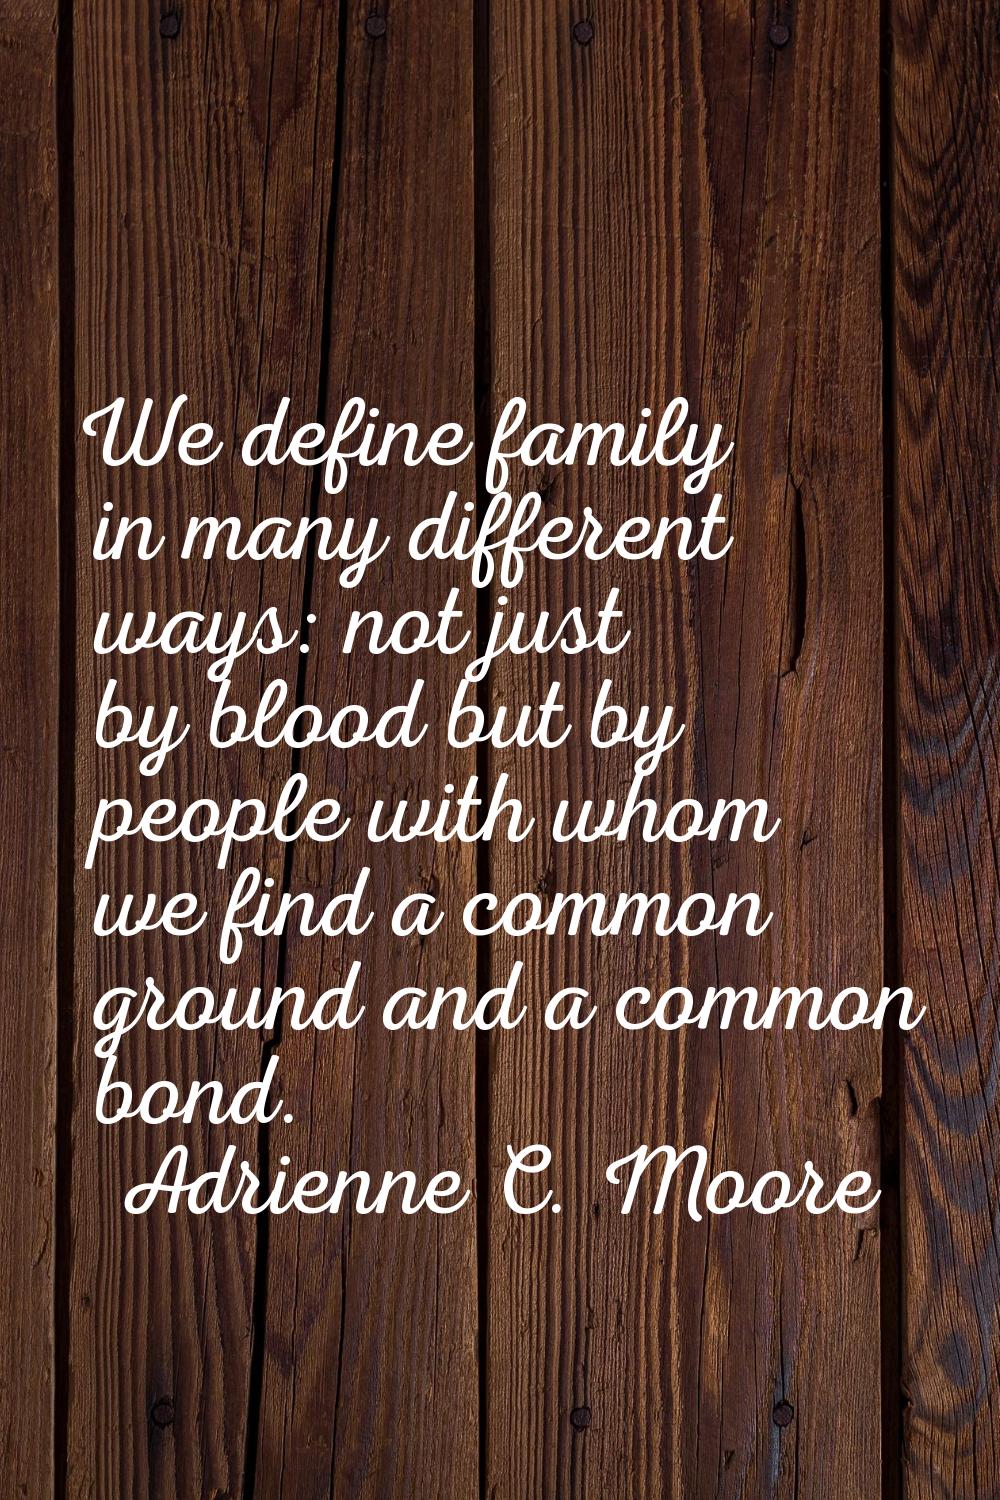 We define family in many different ways: not just by blood but by people with whom we find a common